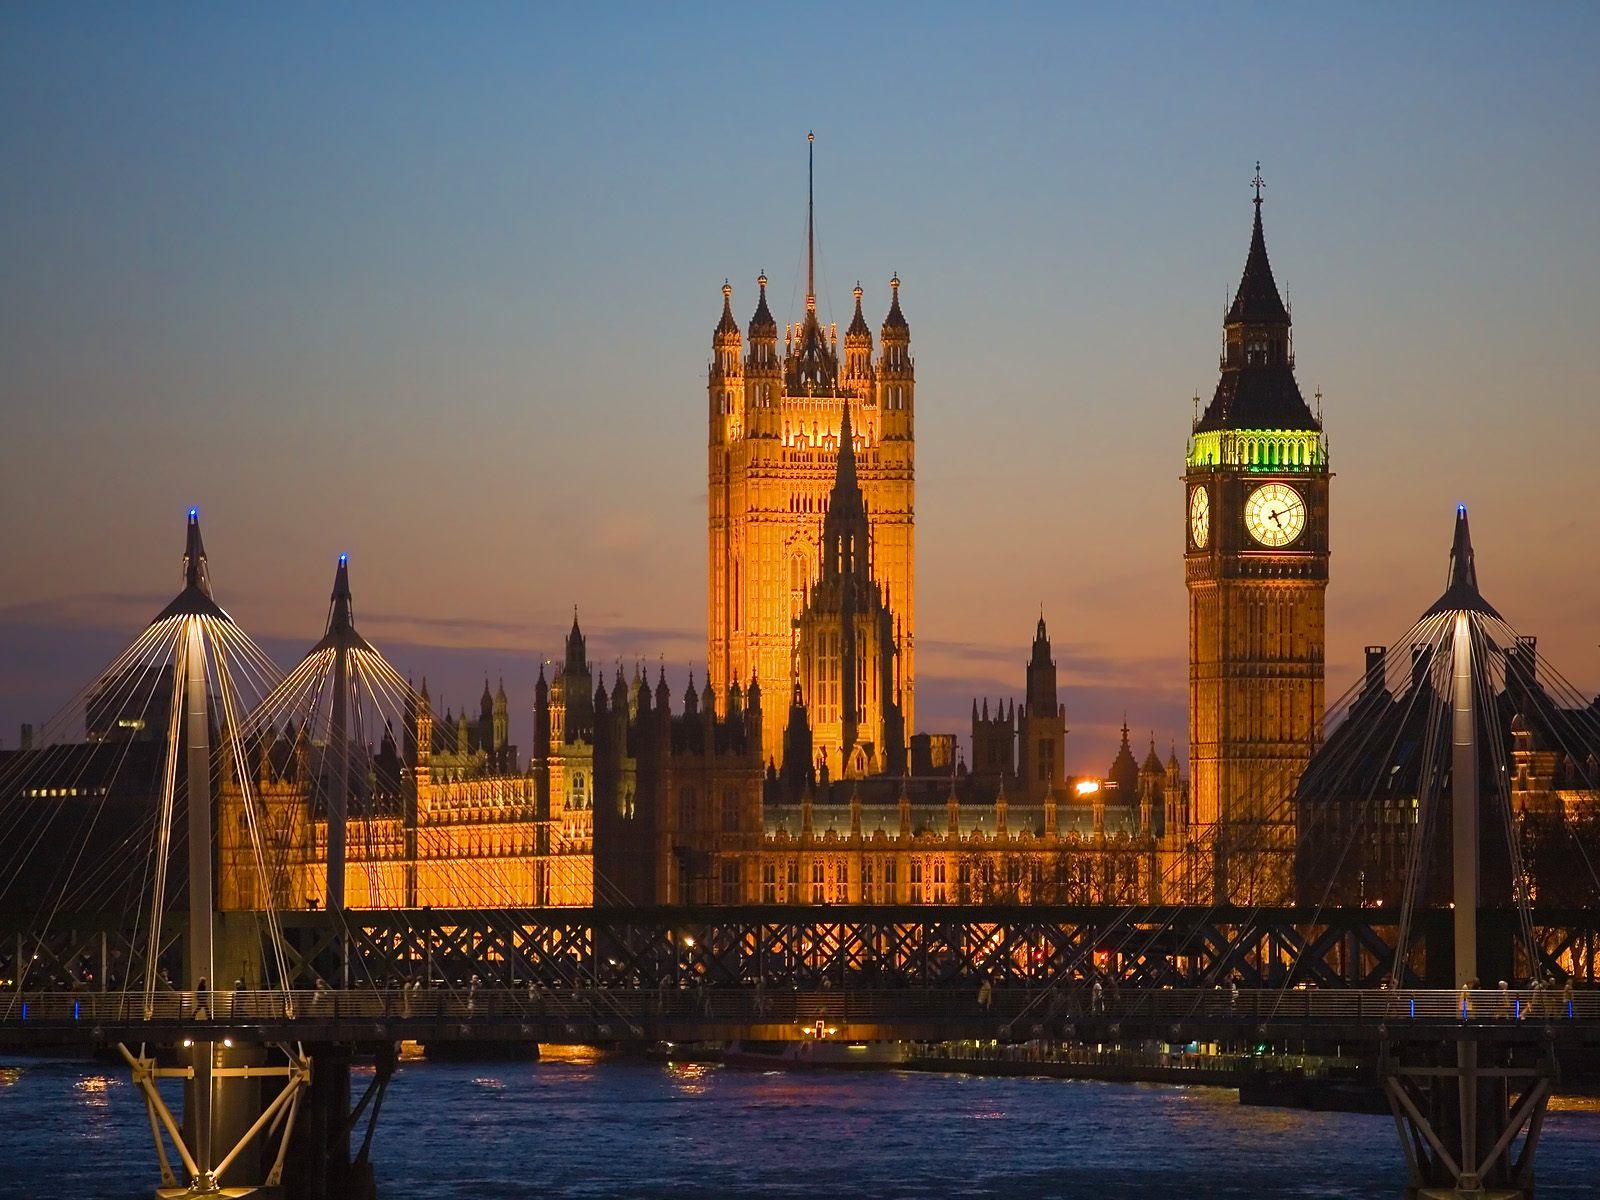 Sample Picture image big ben london HD wallpaper and background